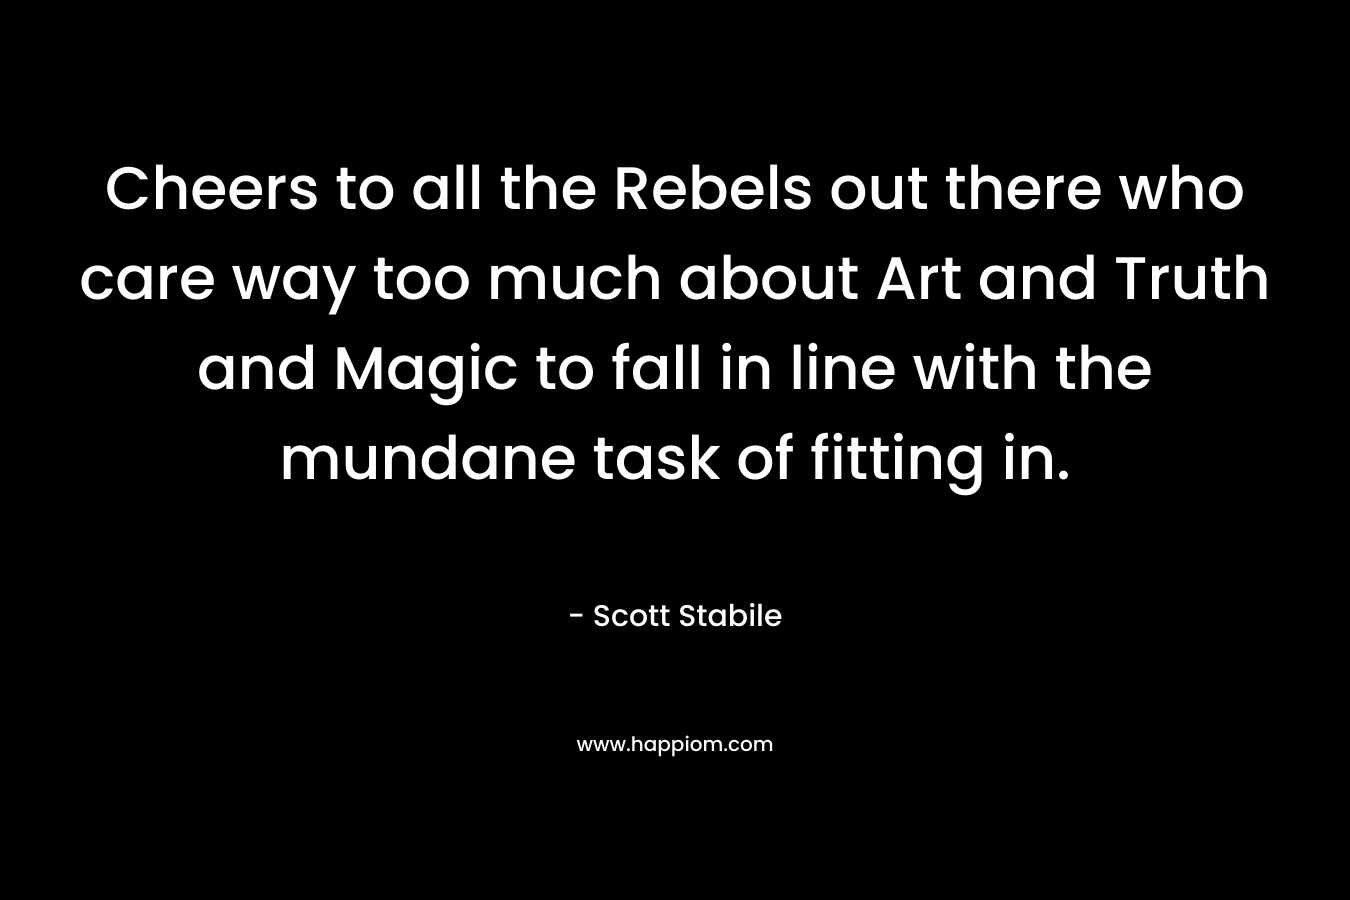 Cheers to all the Rebels out there who care way too much about Art and Truth and Magic to fall in line with the mundane task of fitting in.